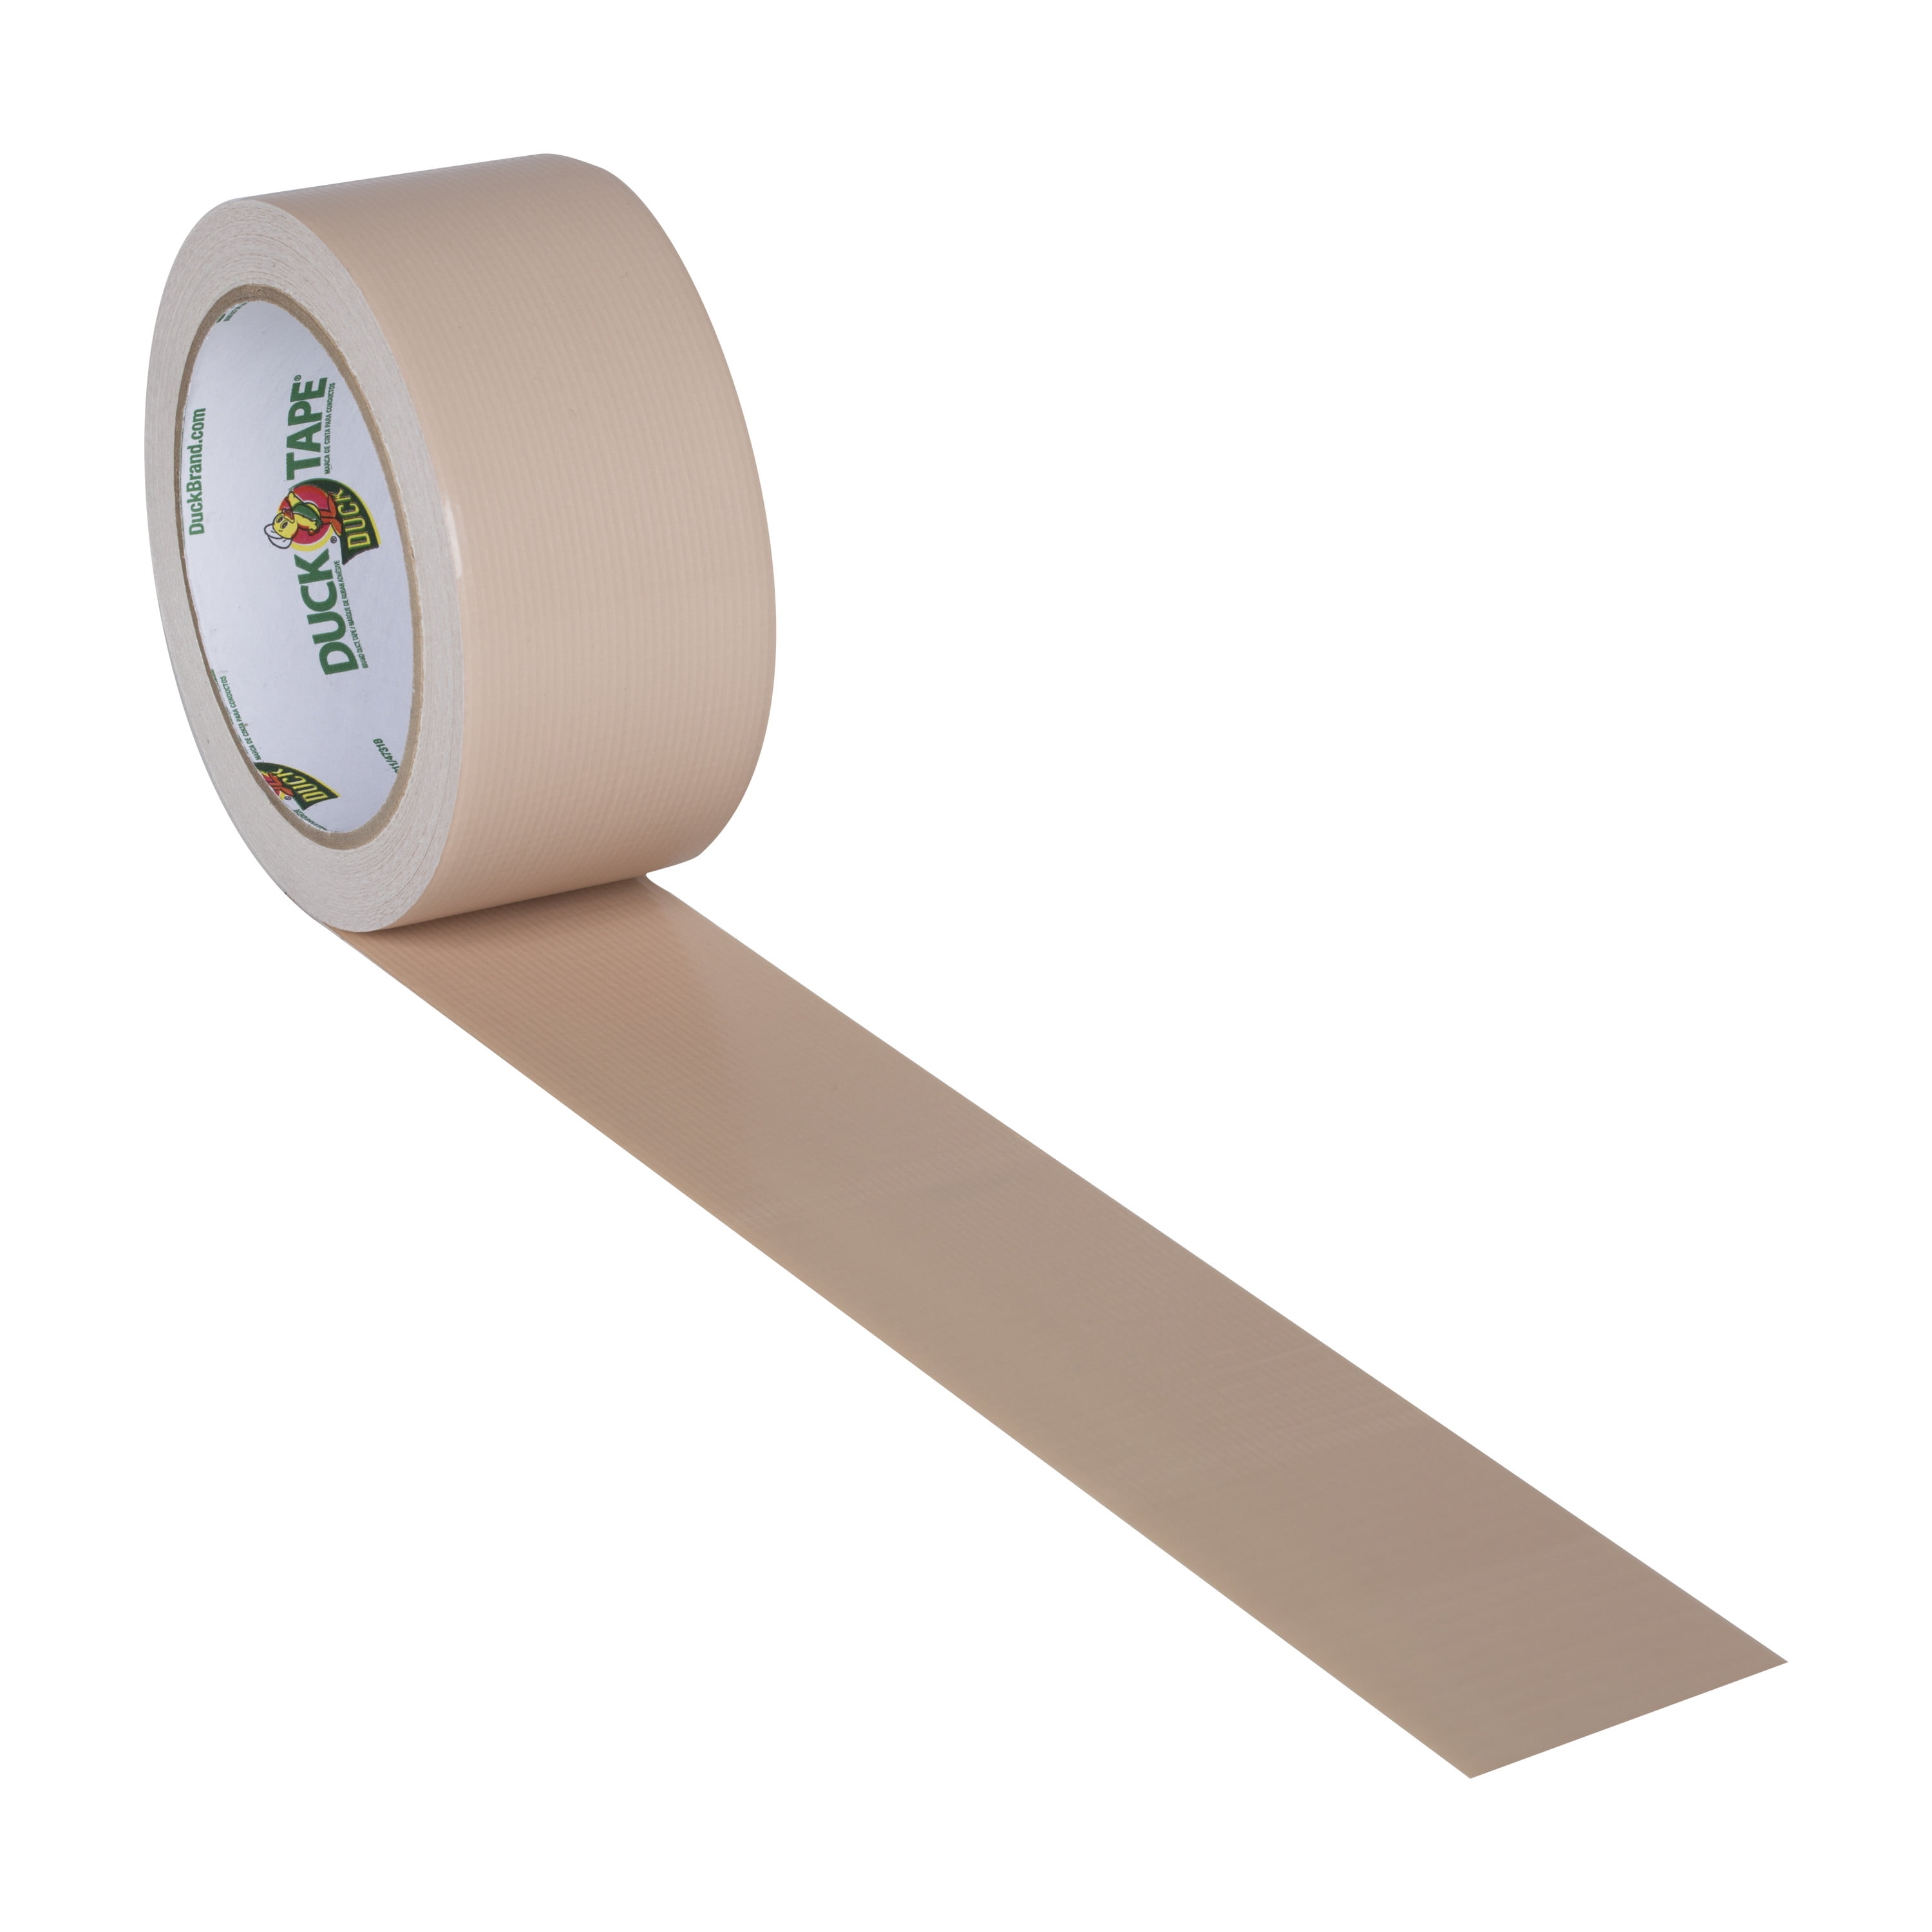  WOD DTC10 Advanced Strength Industrial Grade Tan (Beige) Duct  Tape, 2 inch x 60 yds. Waterproof, UV Resistant For Crafts & Home  Improvement : Industrial & Scientific